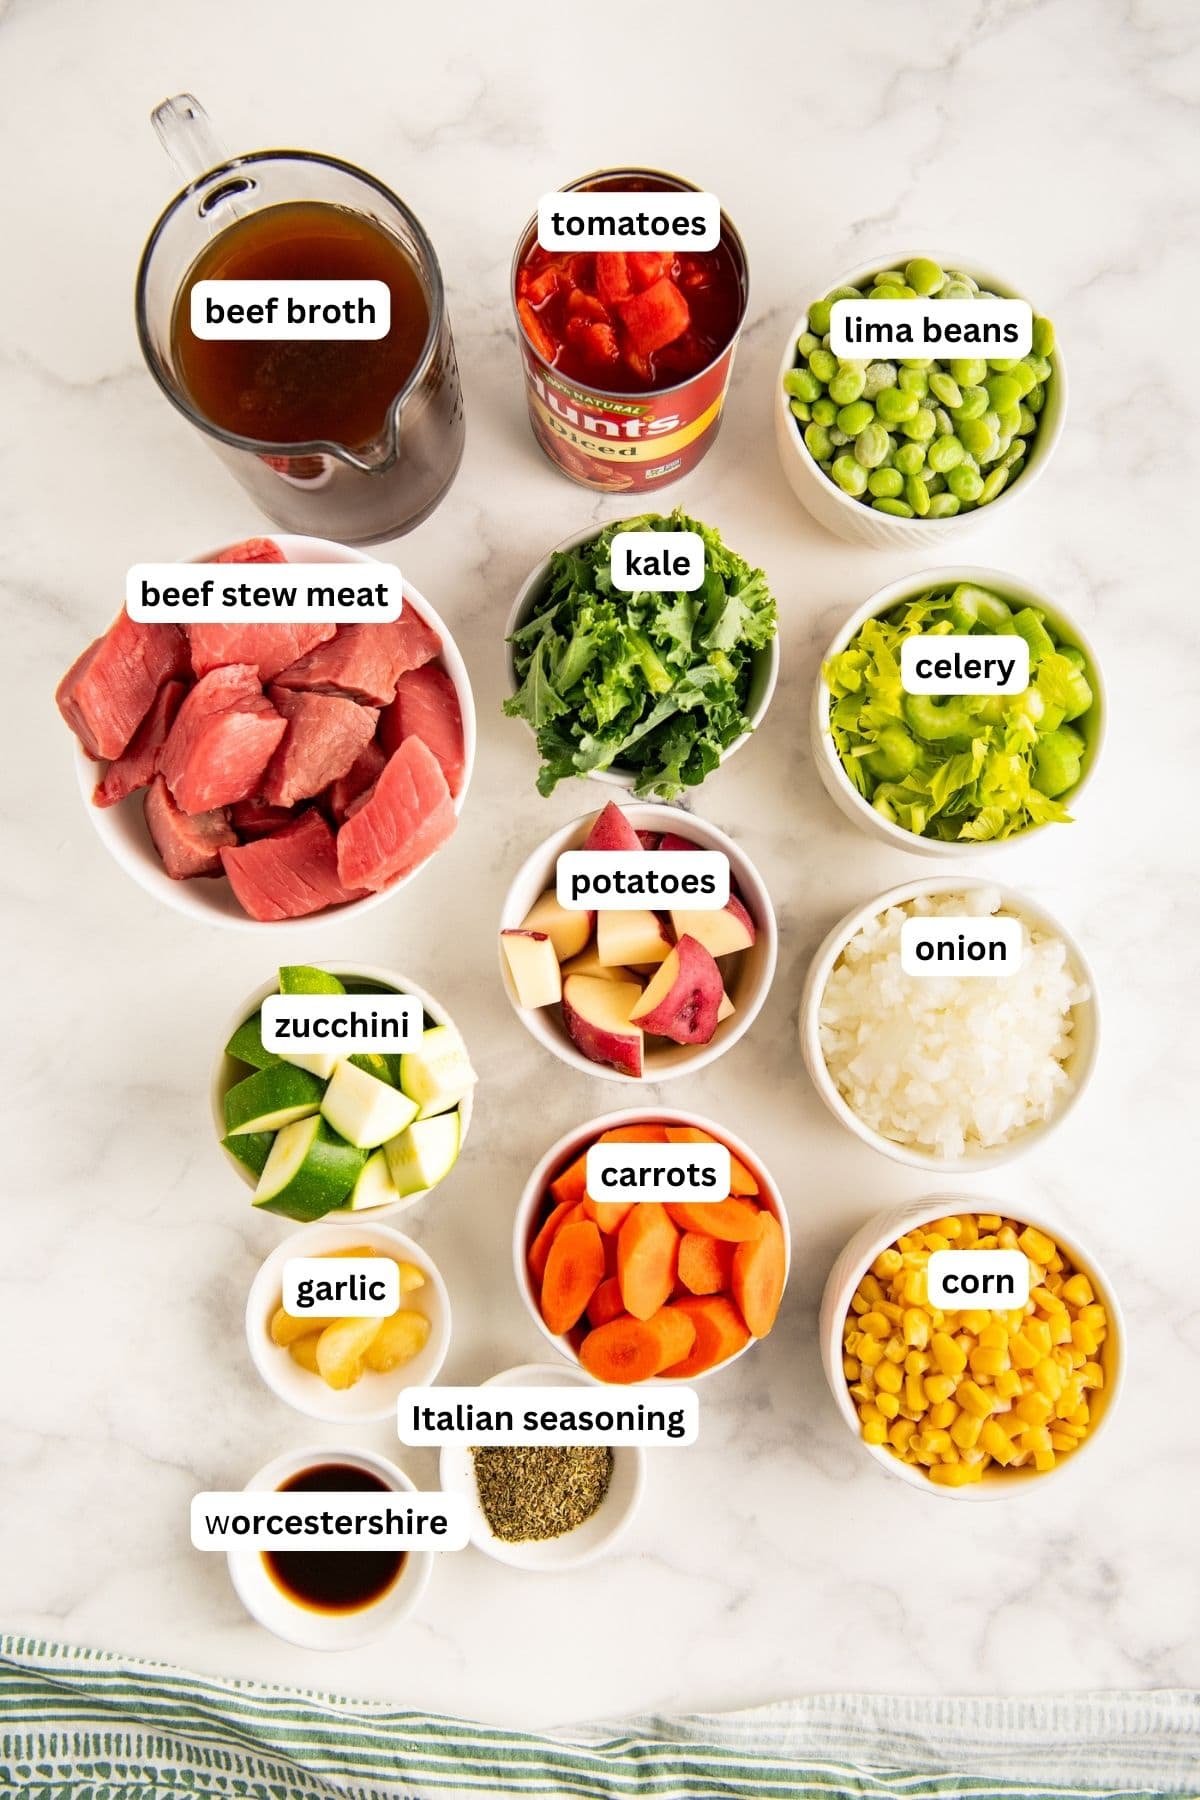 Ingredients for crockpot vegetable beef soup arranged in bowls on a countertop, from top to bottom: beef broth, tomatoes, lima beans, beef stew meat, kale, celery, potatoes, onion, zucchini, carrots, garlic, corn, Italian seasoning and Worcestershire sauce.